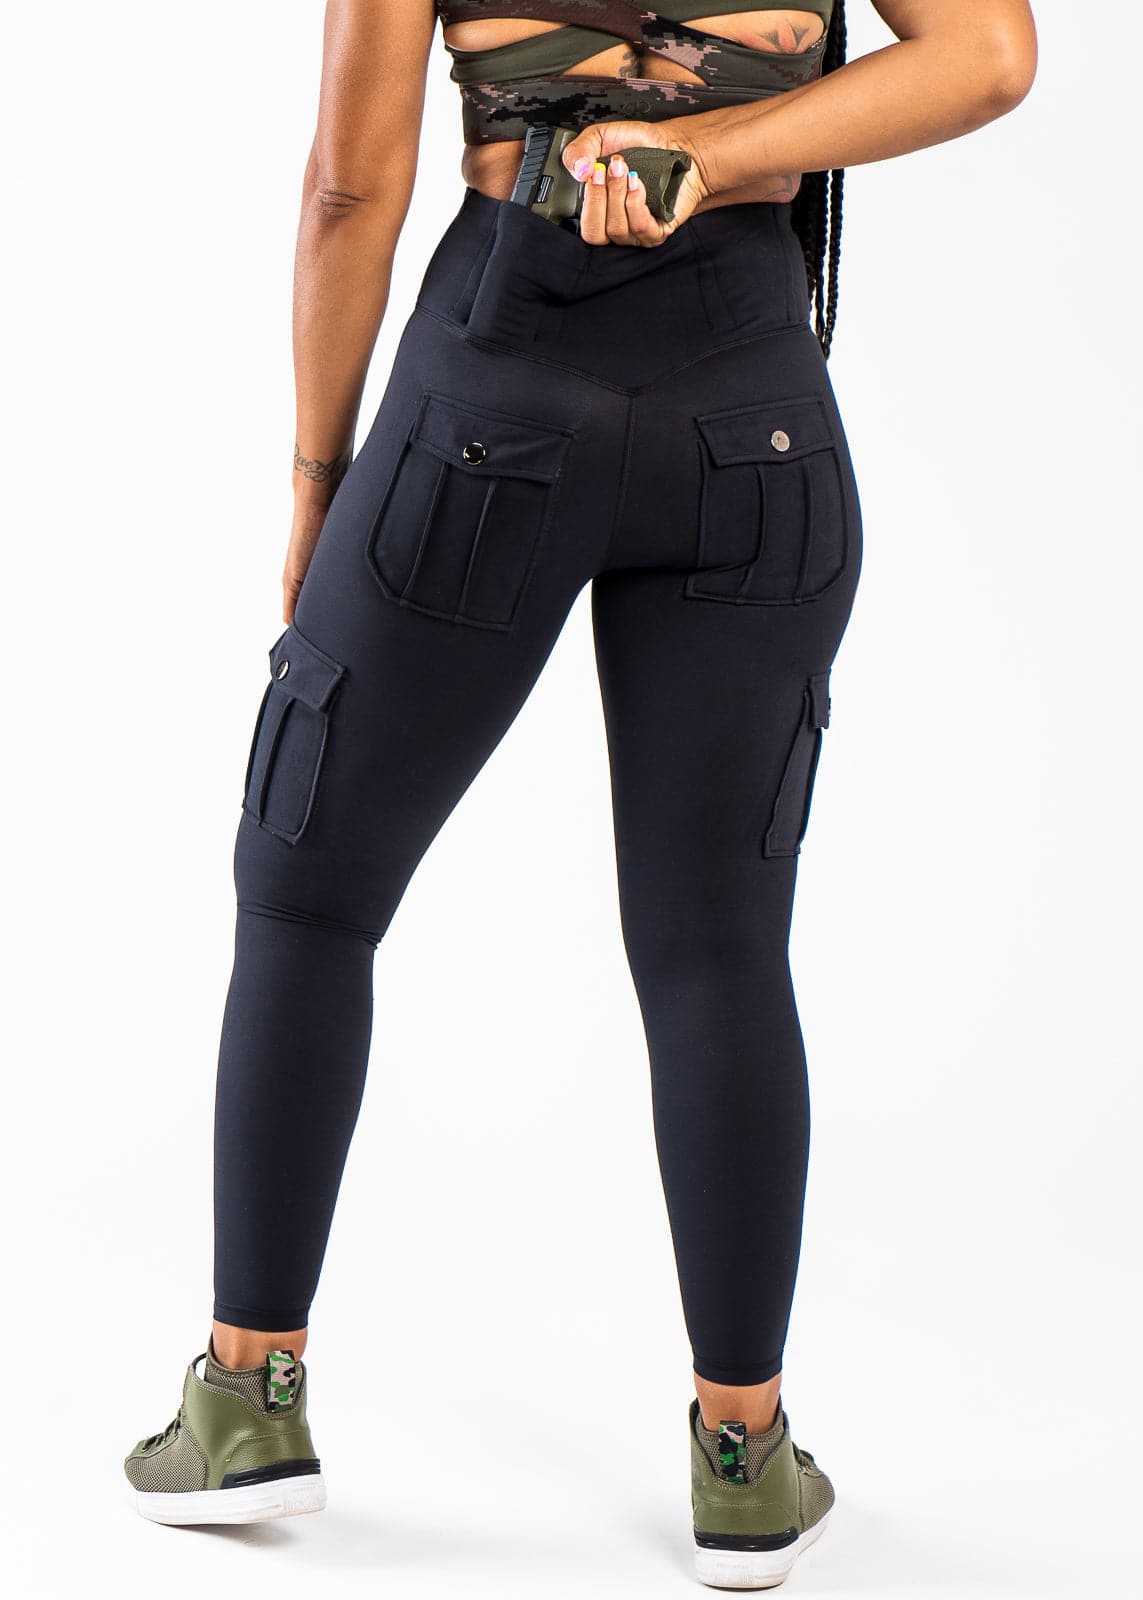 Shoulders Down 3/4 Back View - Concealed Carry Leggings With Tactical Pockets Reaching for Concealed Carry | Black